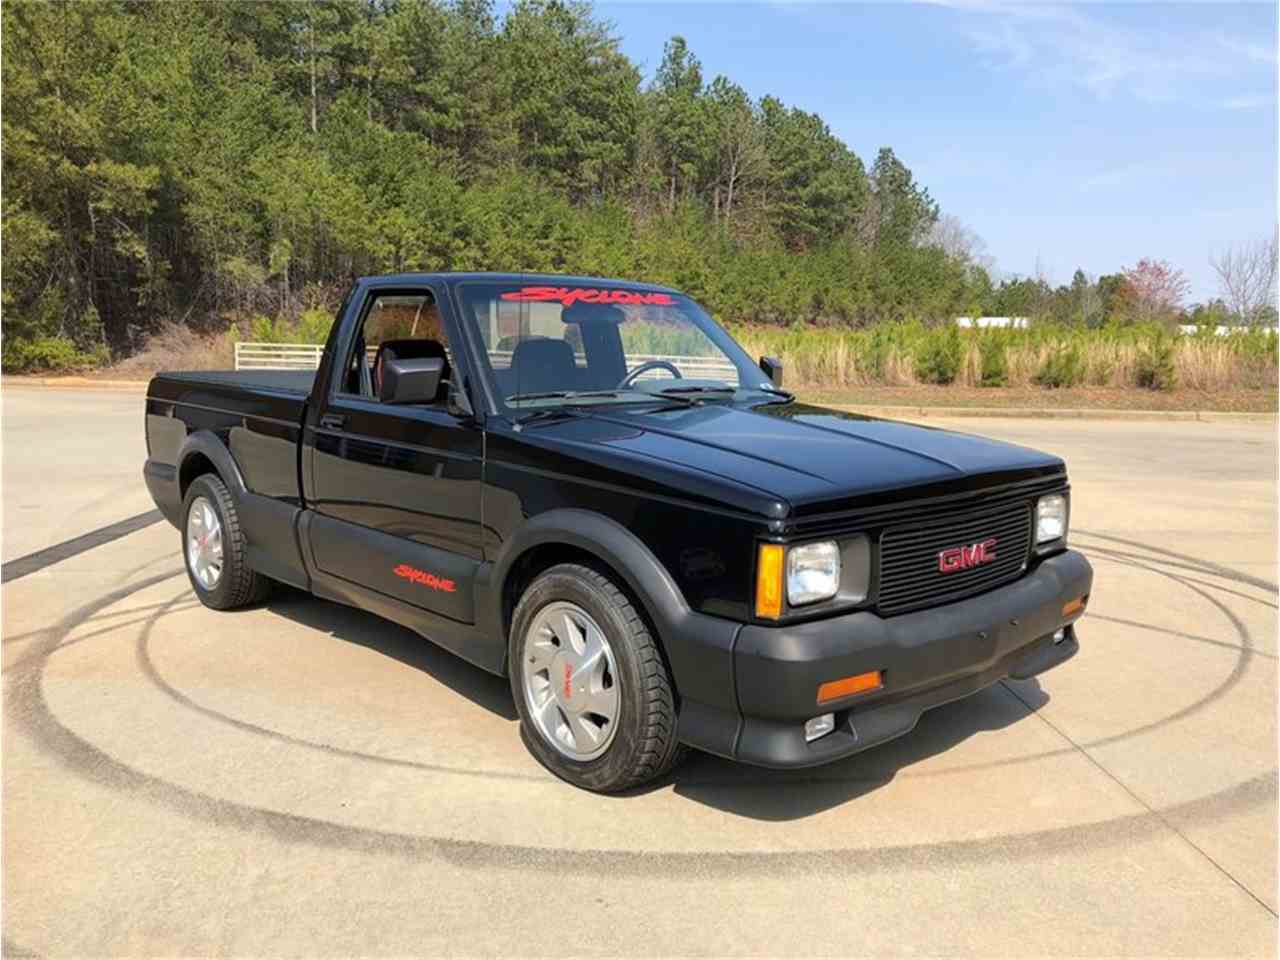 The GMC Syclone had a turbocharged 280-horsepower V6 engine with 350 pound-feet of torque. It could give a Corvette a run for its money. | ClassicCars.com photo